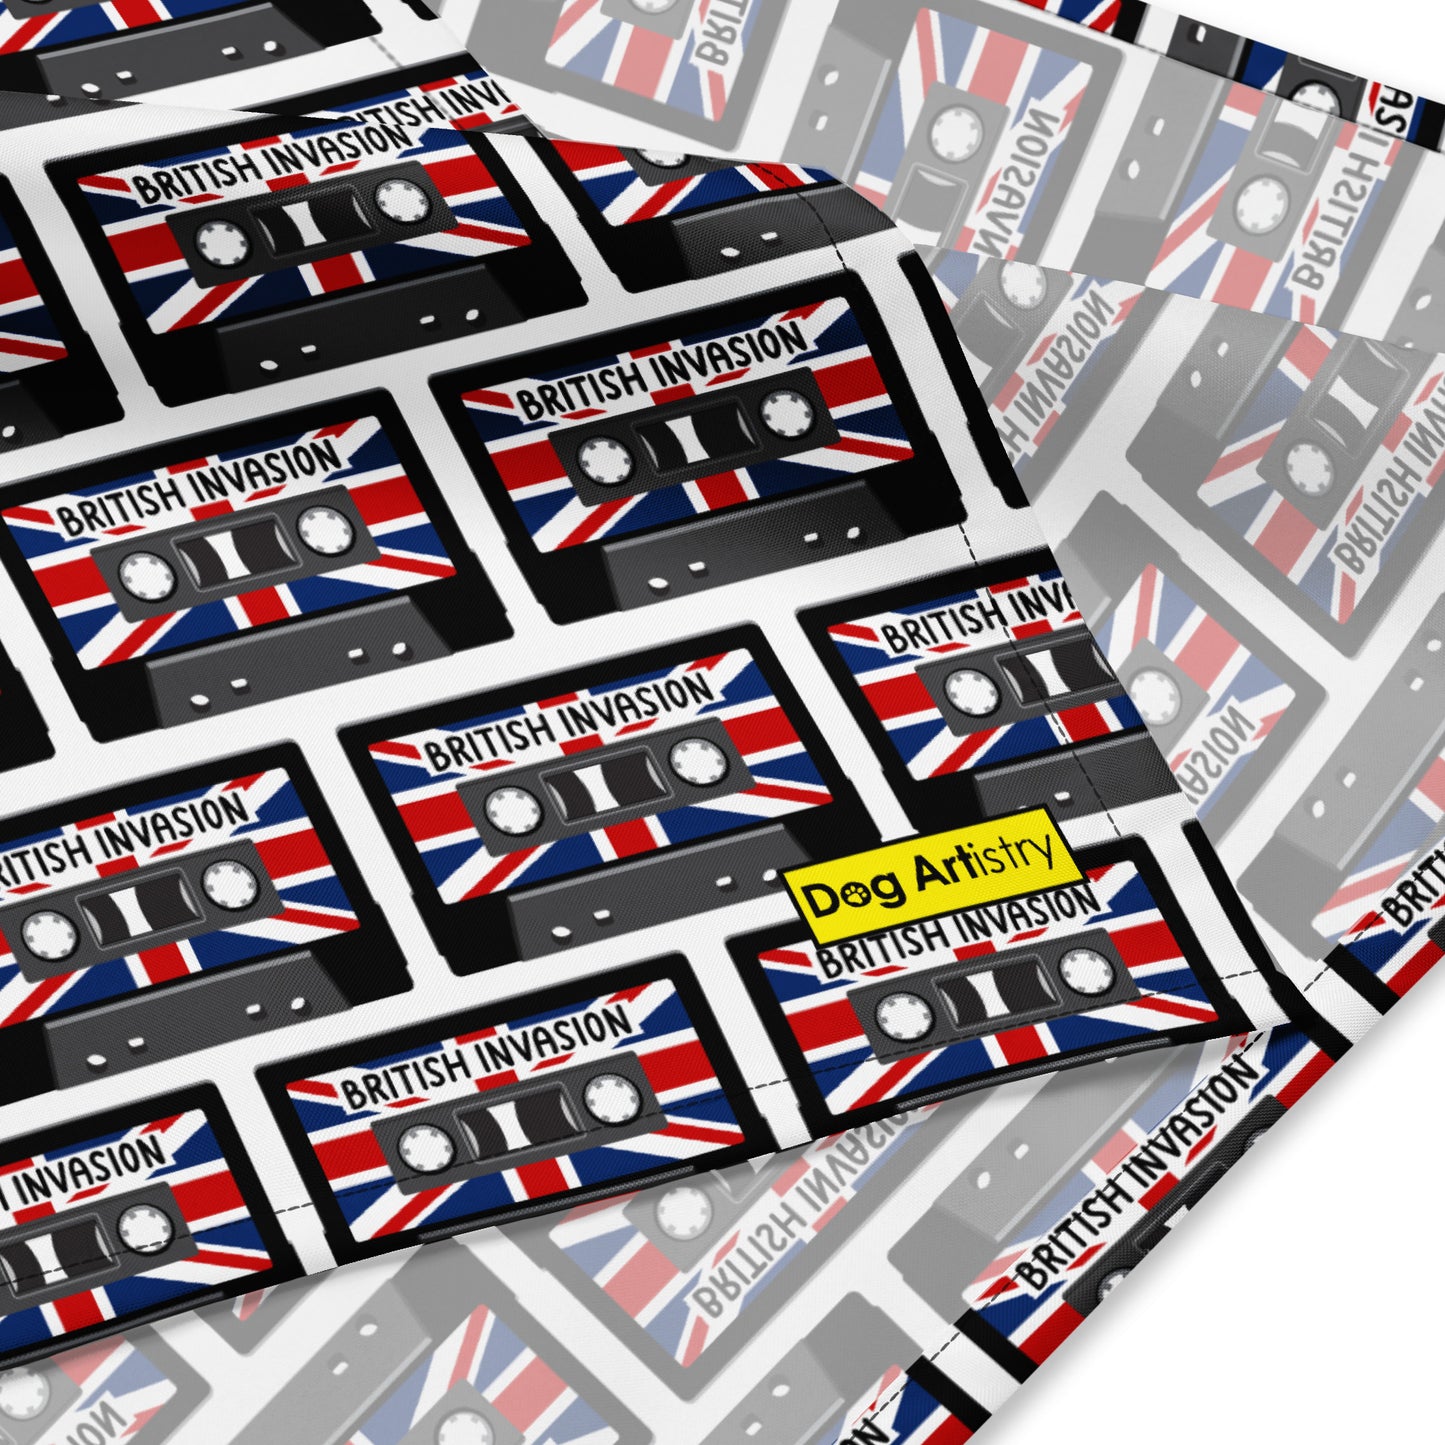 British Invasion Cassette Tapes with Union Jack Flag All-over print bandana